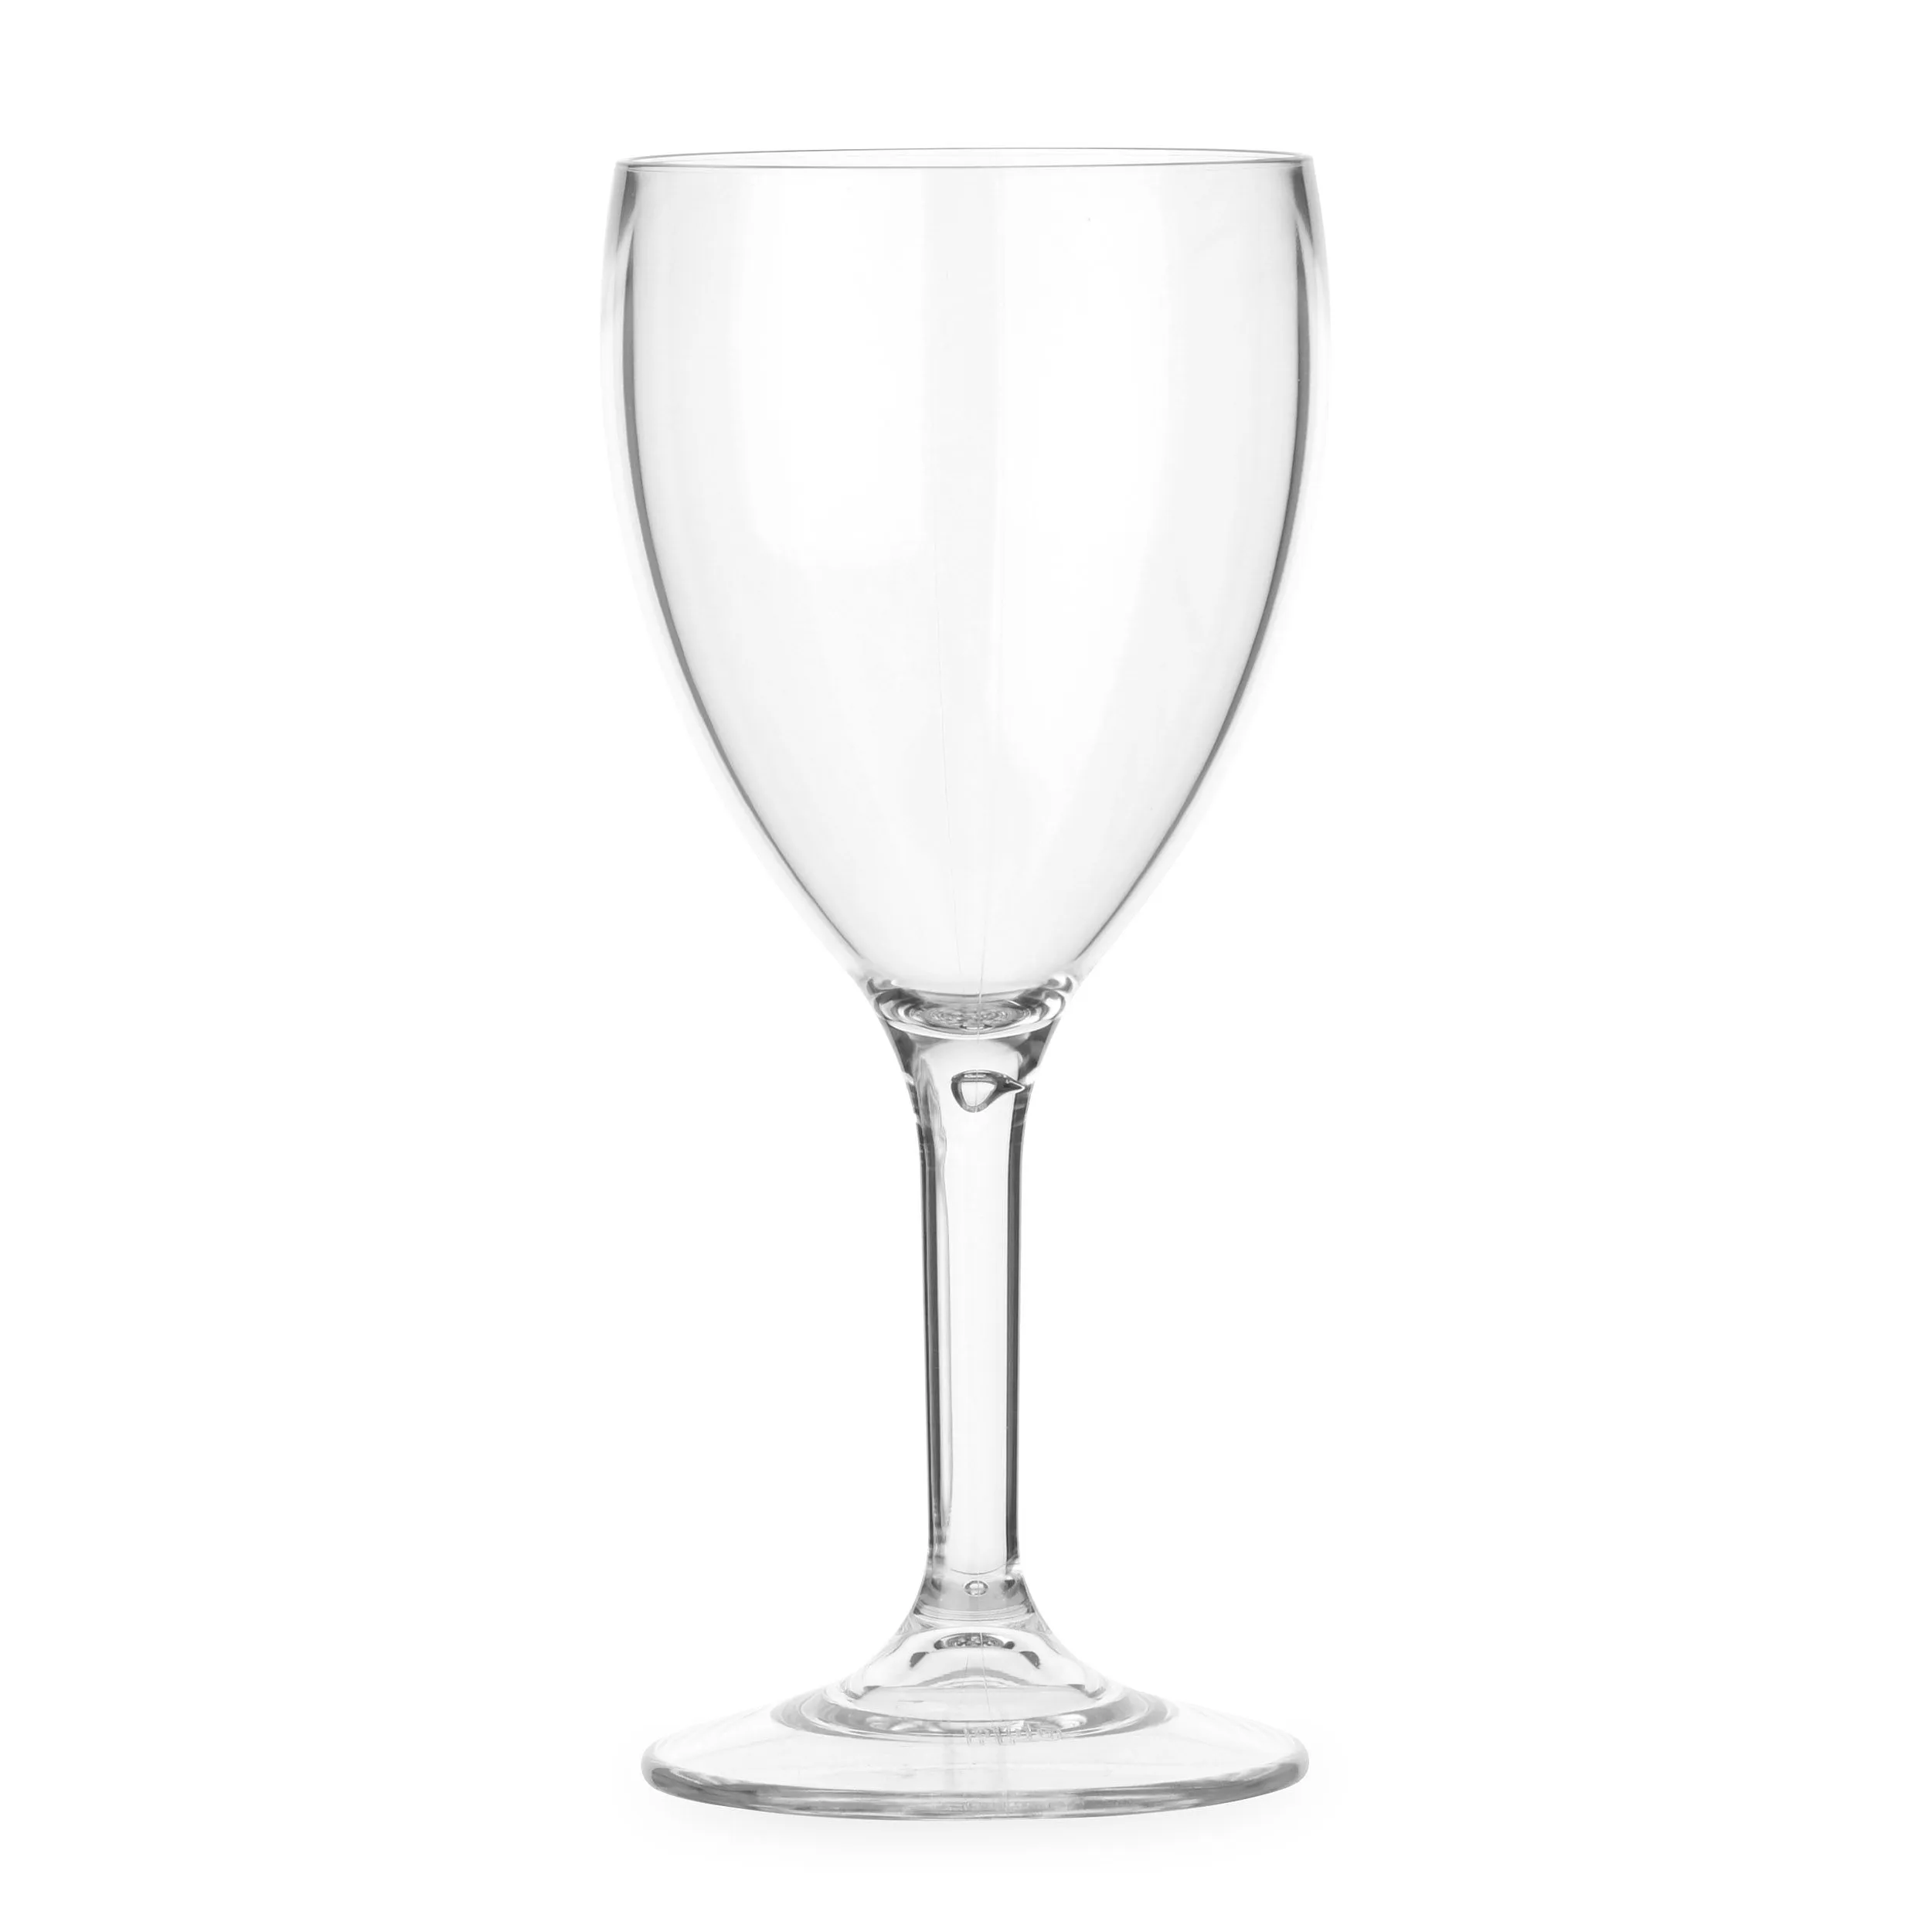 Lay-Z-Spa Wine glass, Pack of 4